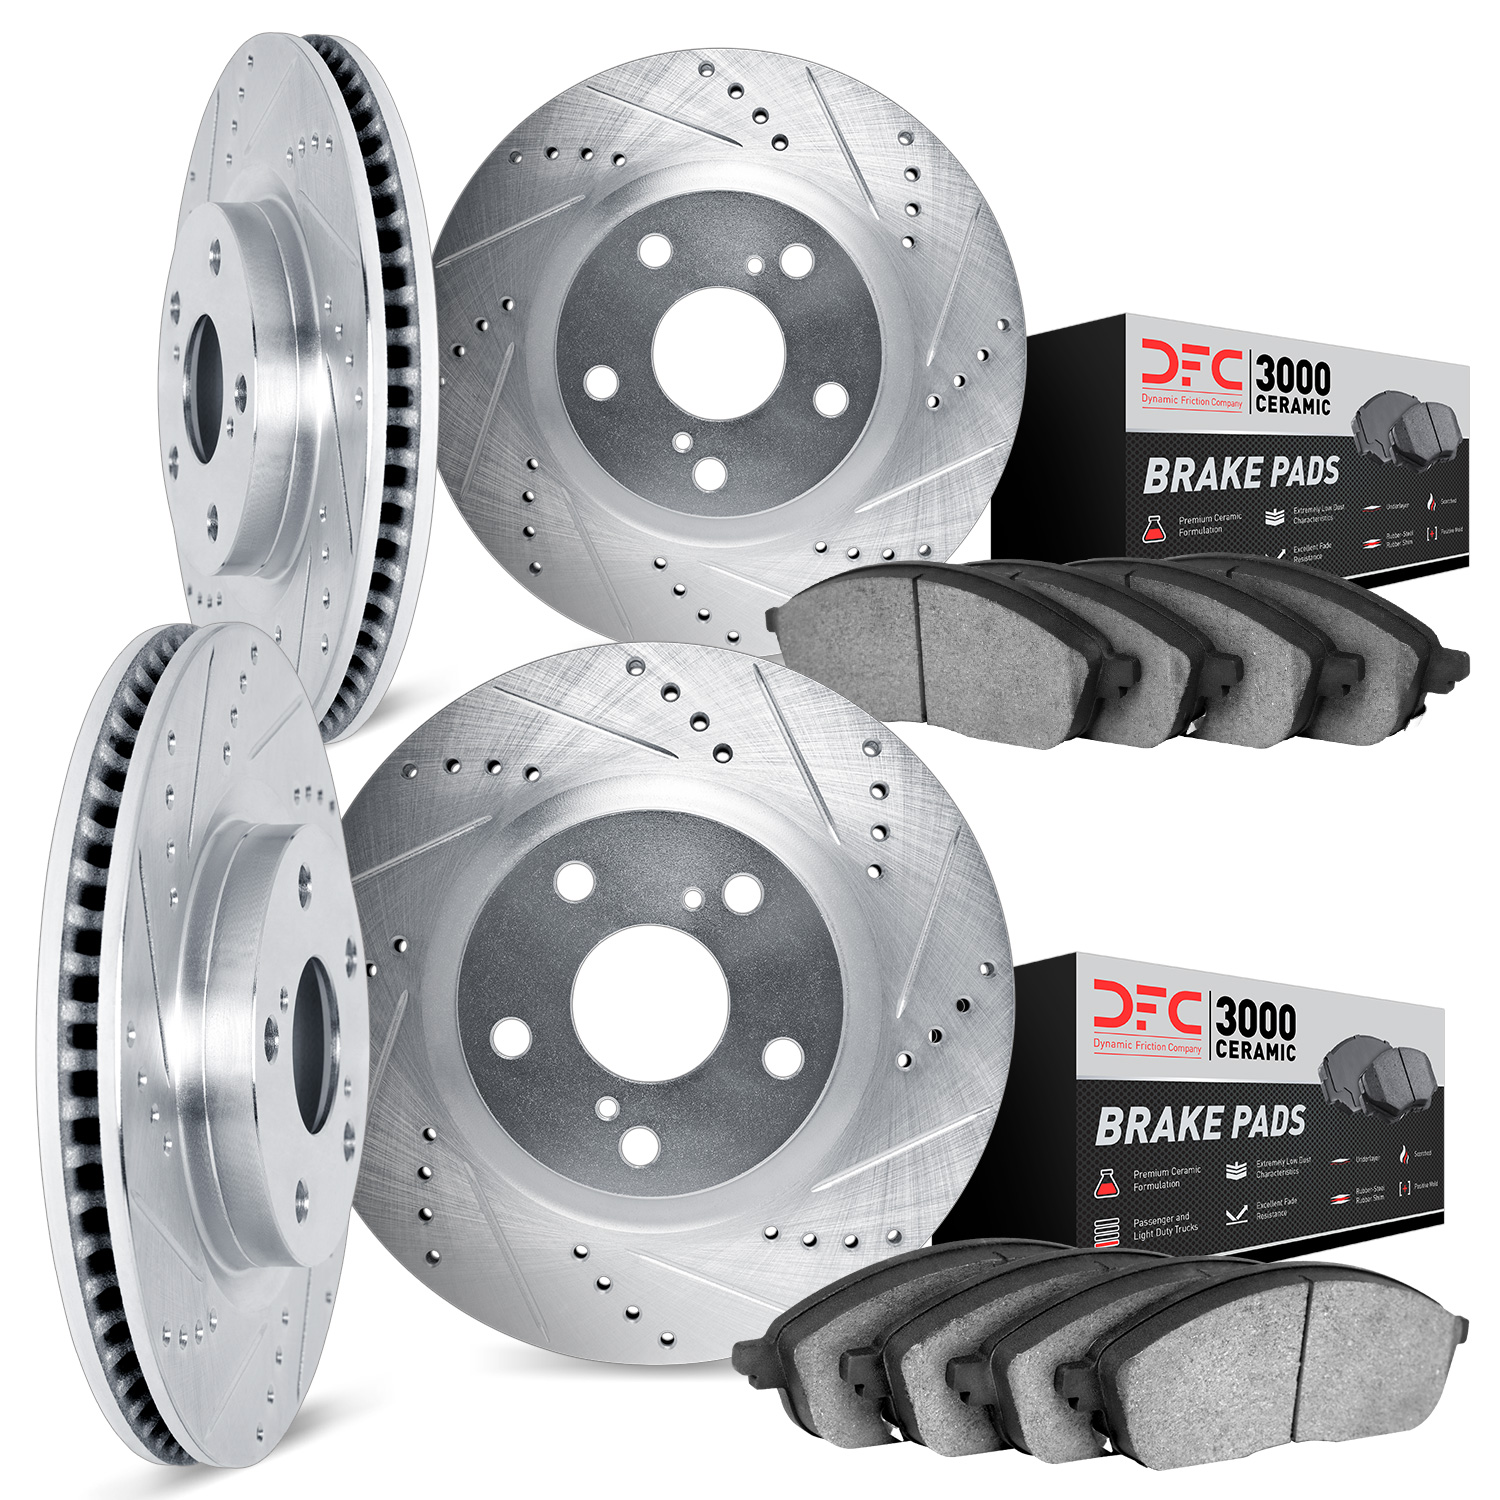 7304-80006 Drilled/Slotted Brake Rotor with 3000-Series Ceramic Brake Pads Kit [Silver], 1986-1991 Ford/Lincoln/Mercury/Mazda, P